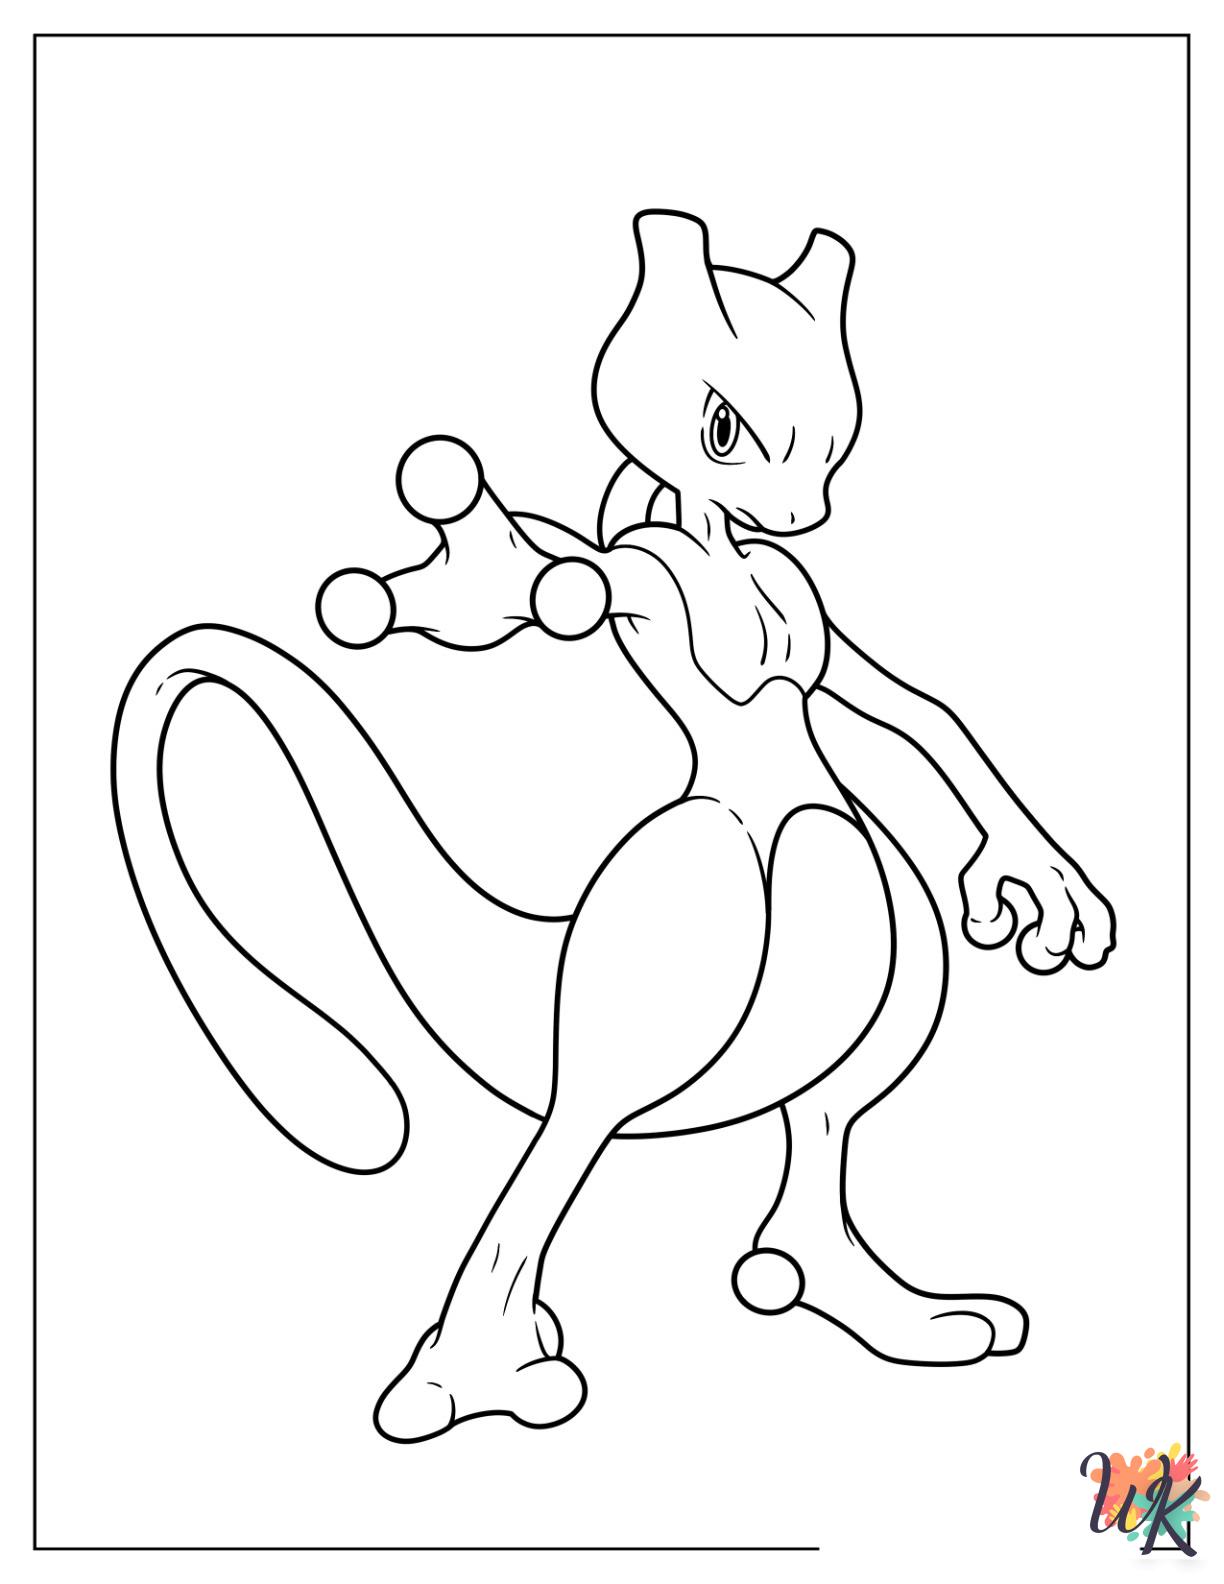 old-fashioned Mewtwo coloring pages